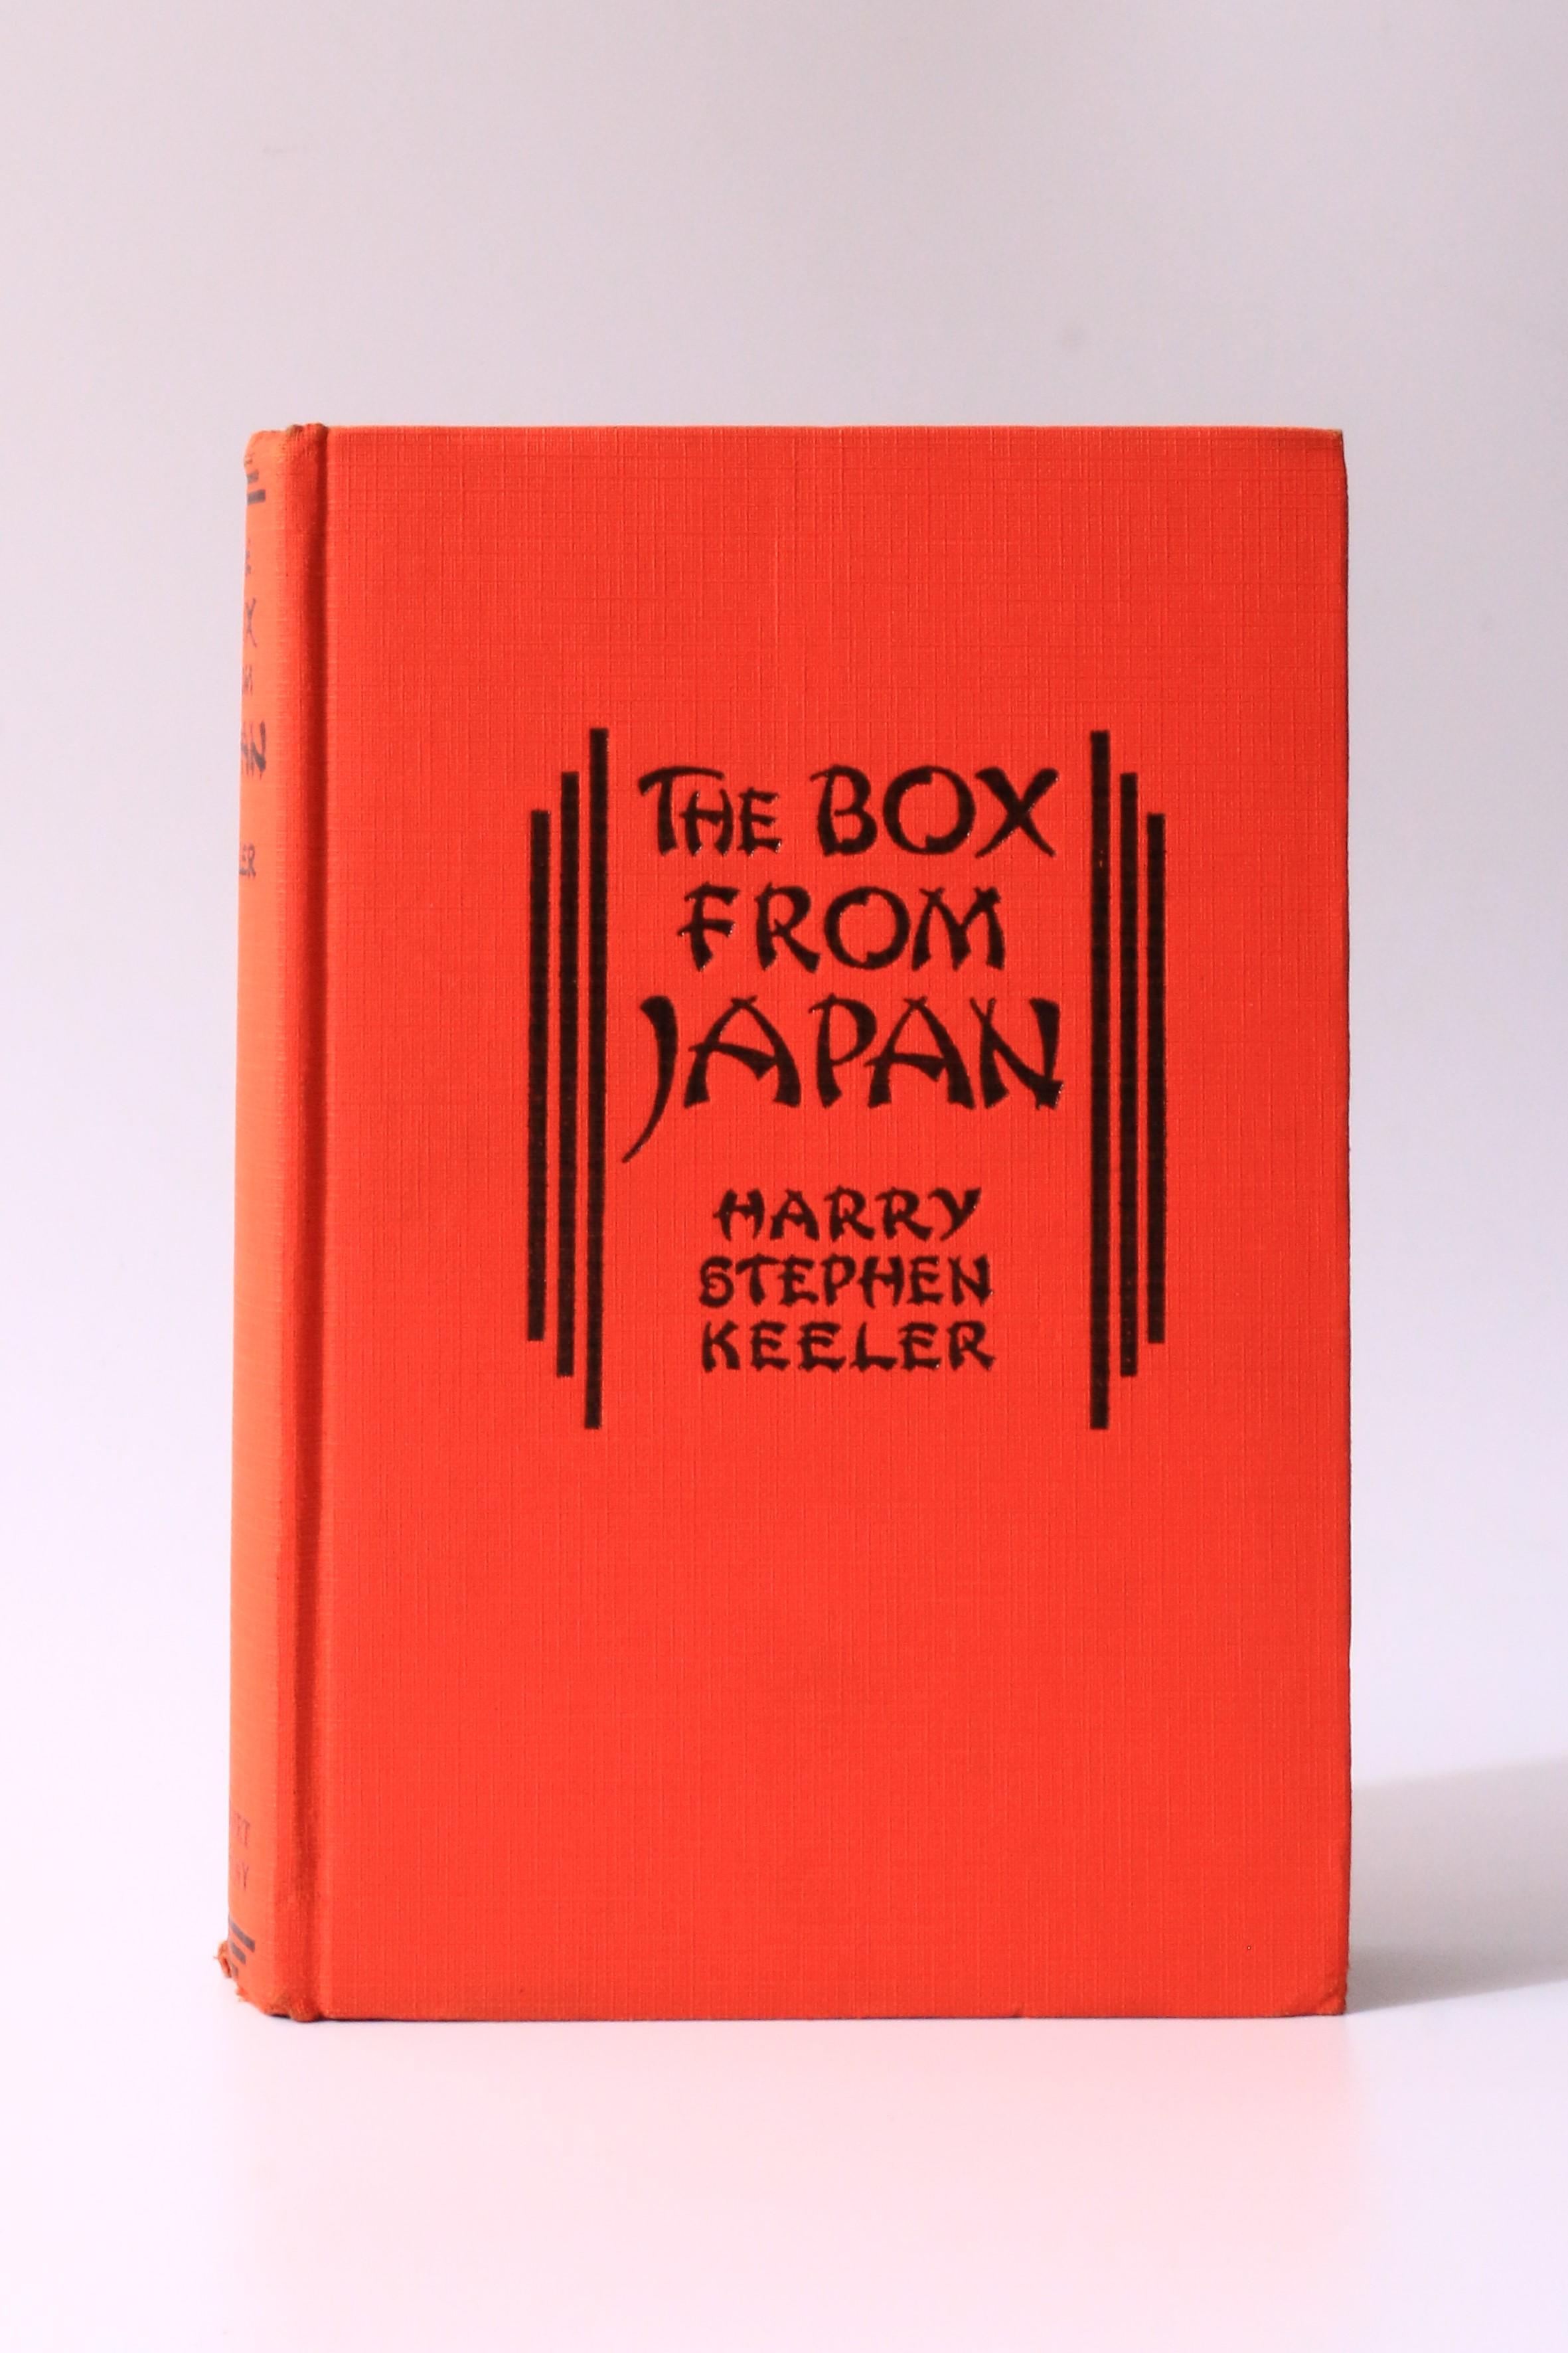 Harry Stephen Keeler - The Box from Japan - A.L. Burt, 1932, First Edition.